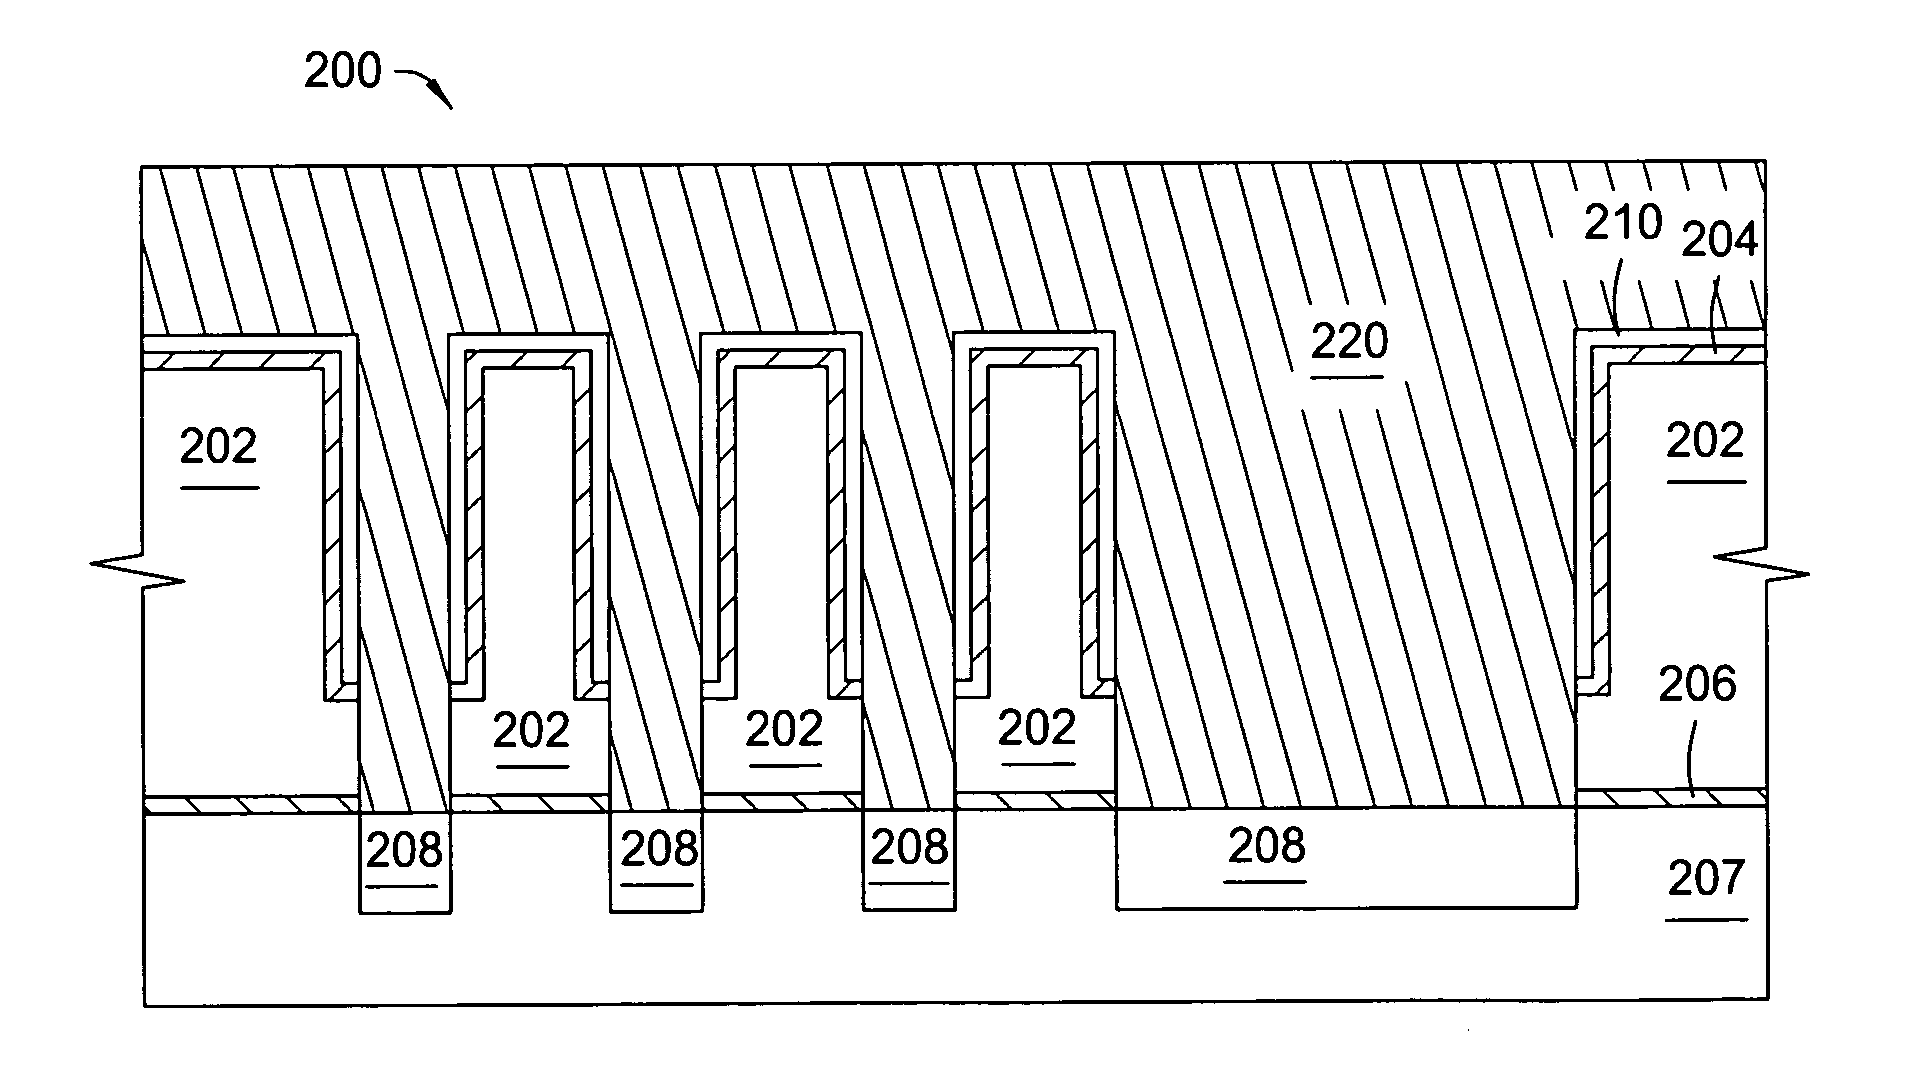 Process for electroless copper deposition